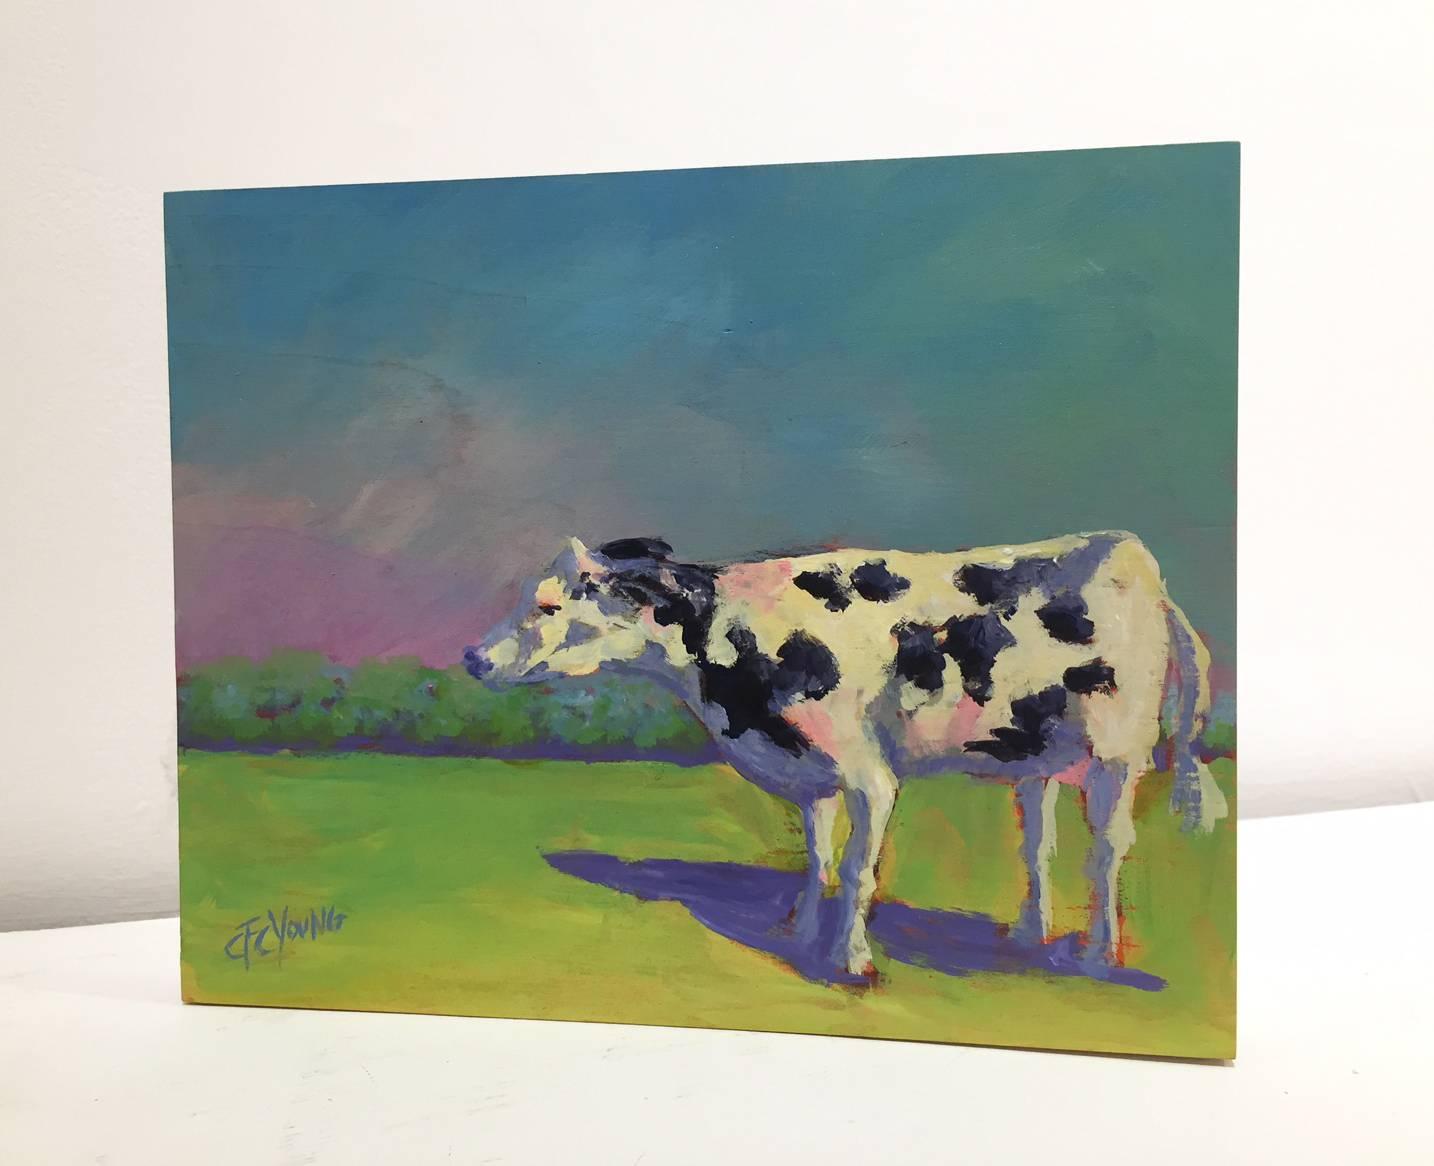 small, colorful, transitional, contemporary, interior design, interior decor, Dairy cow, spots, farm, barn, farmhouse, barnyard, Spring, Summer, pink, purple, blue, sunshine, green, grass, pasture.

Carol C. Young is landscape painter working in